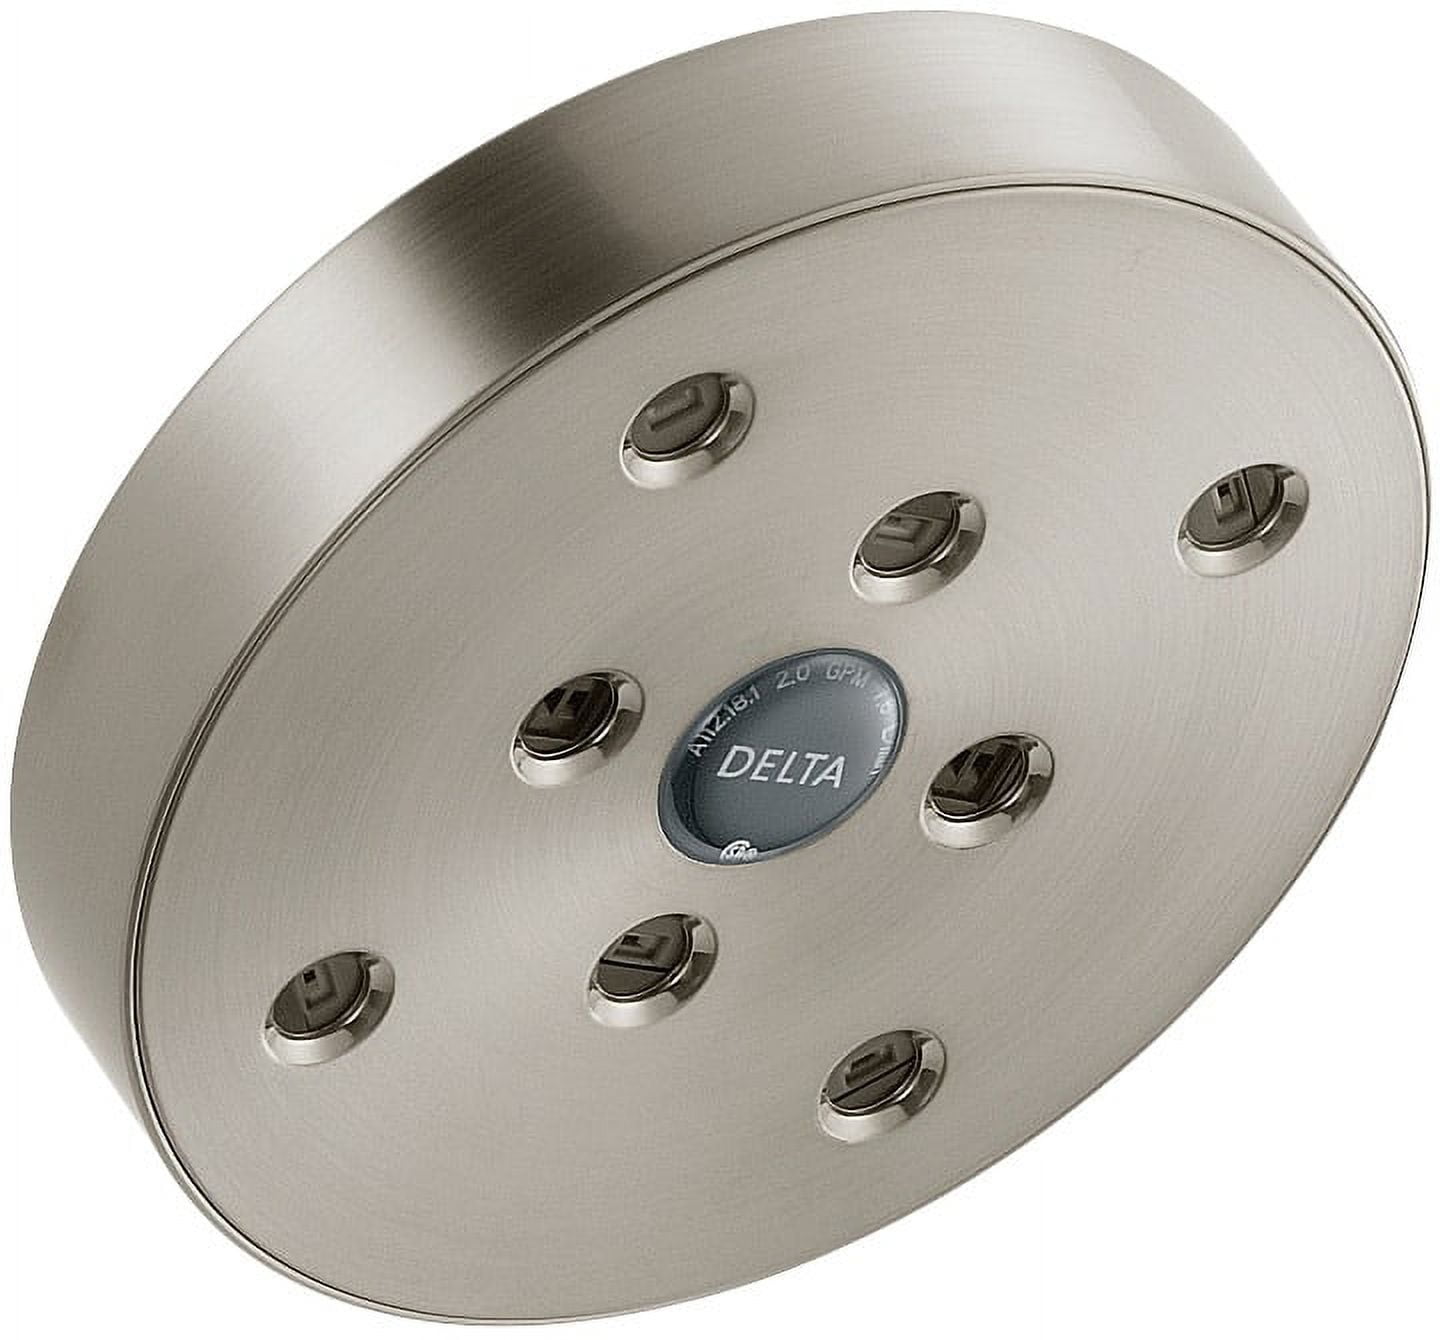 Rp70175-ss15 H2o Kinetic Shower Head 1.5 Gpm - Stainless Steel